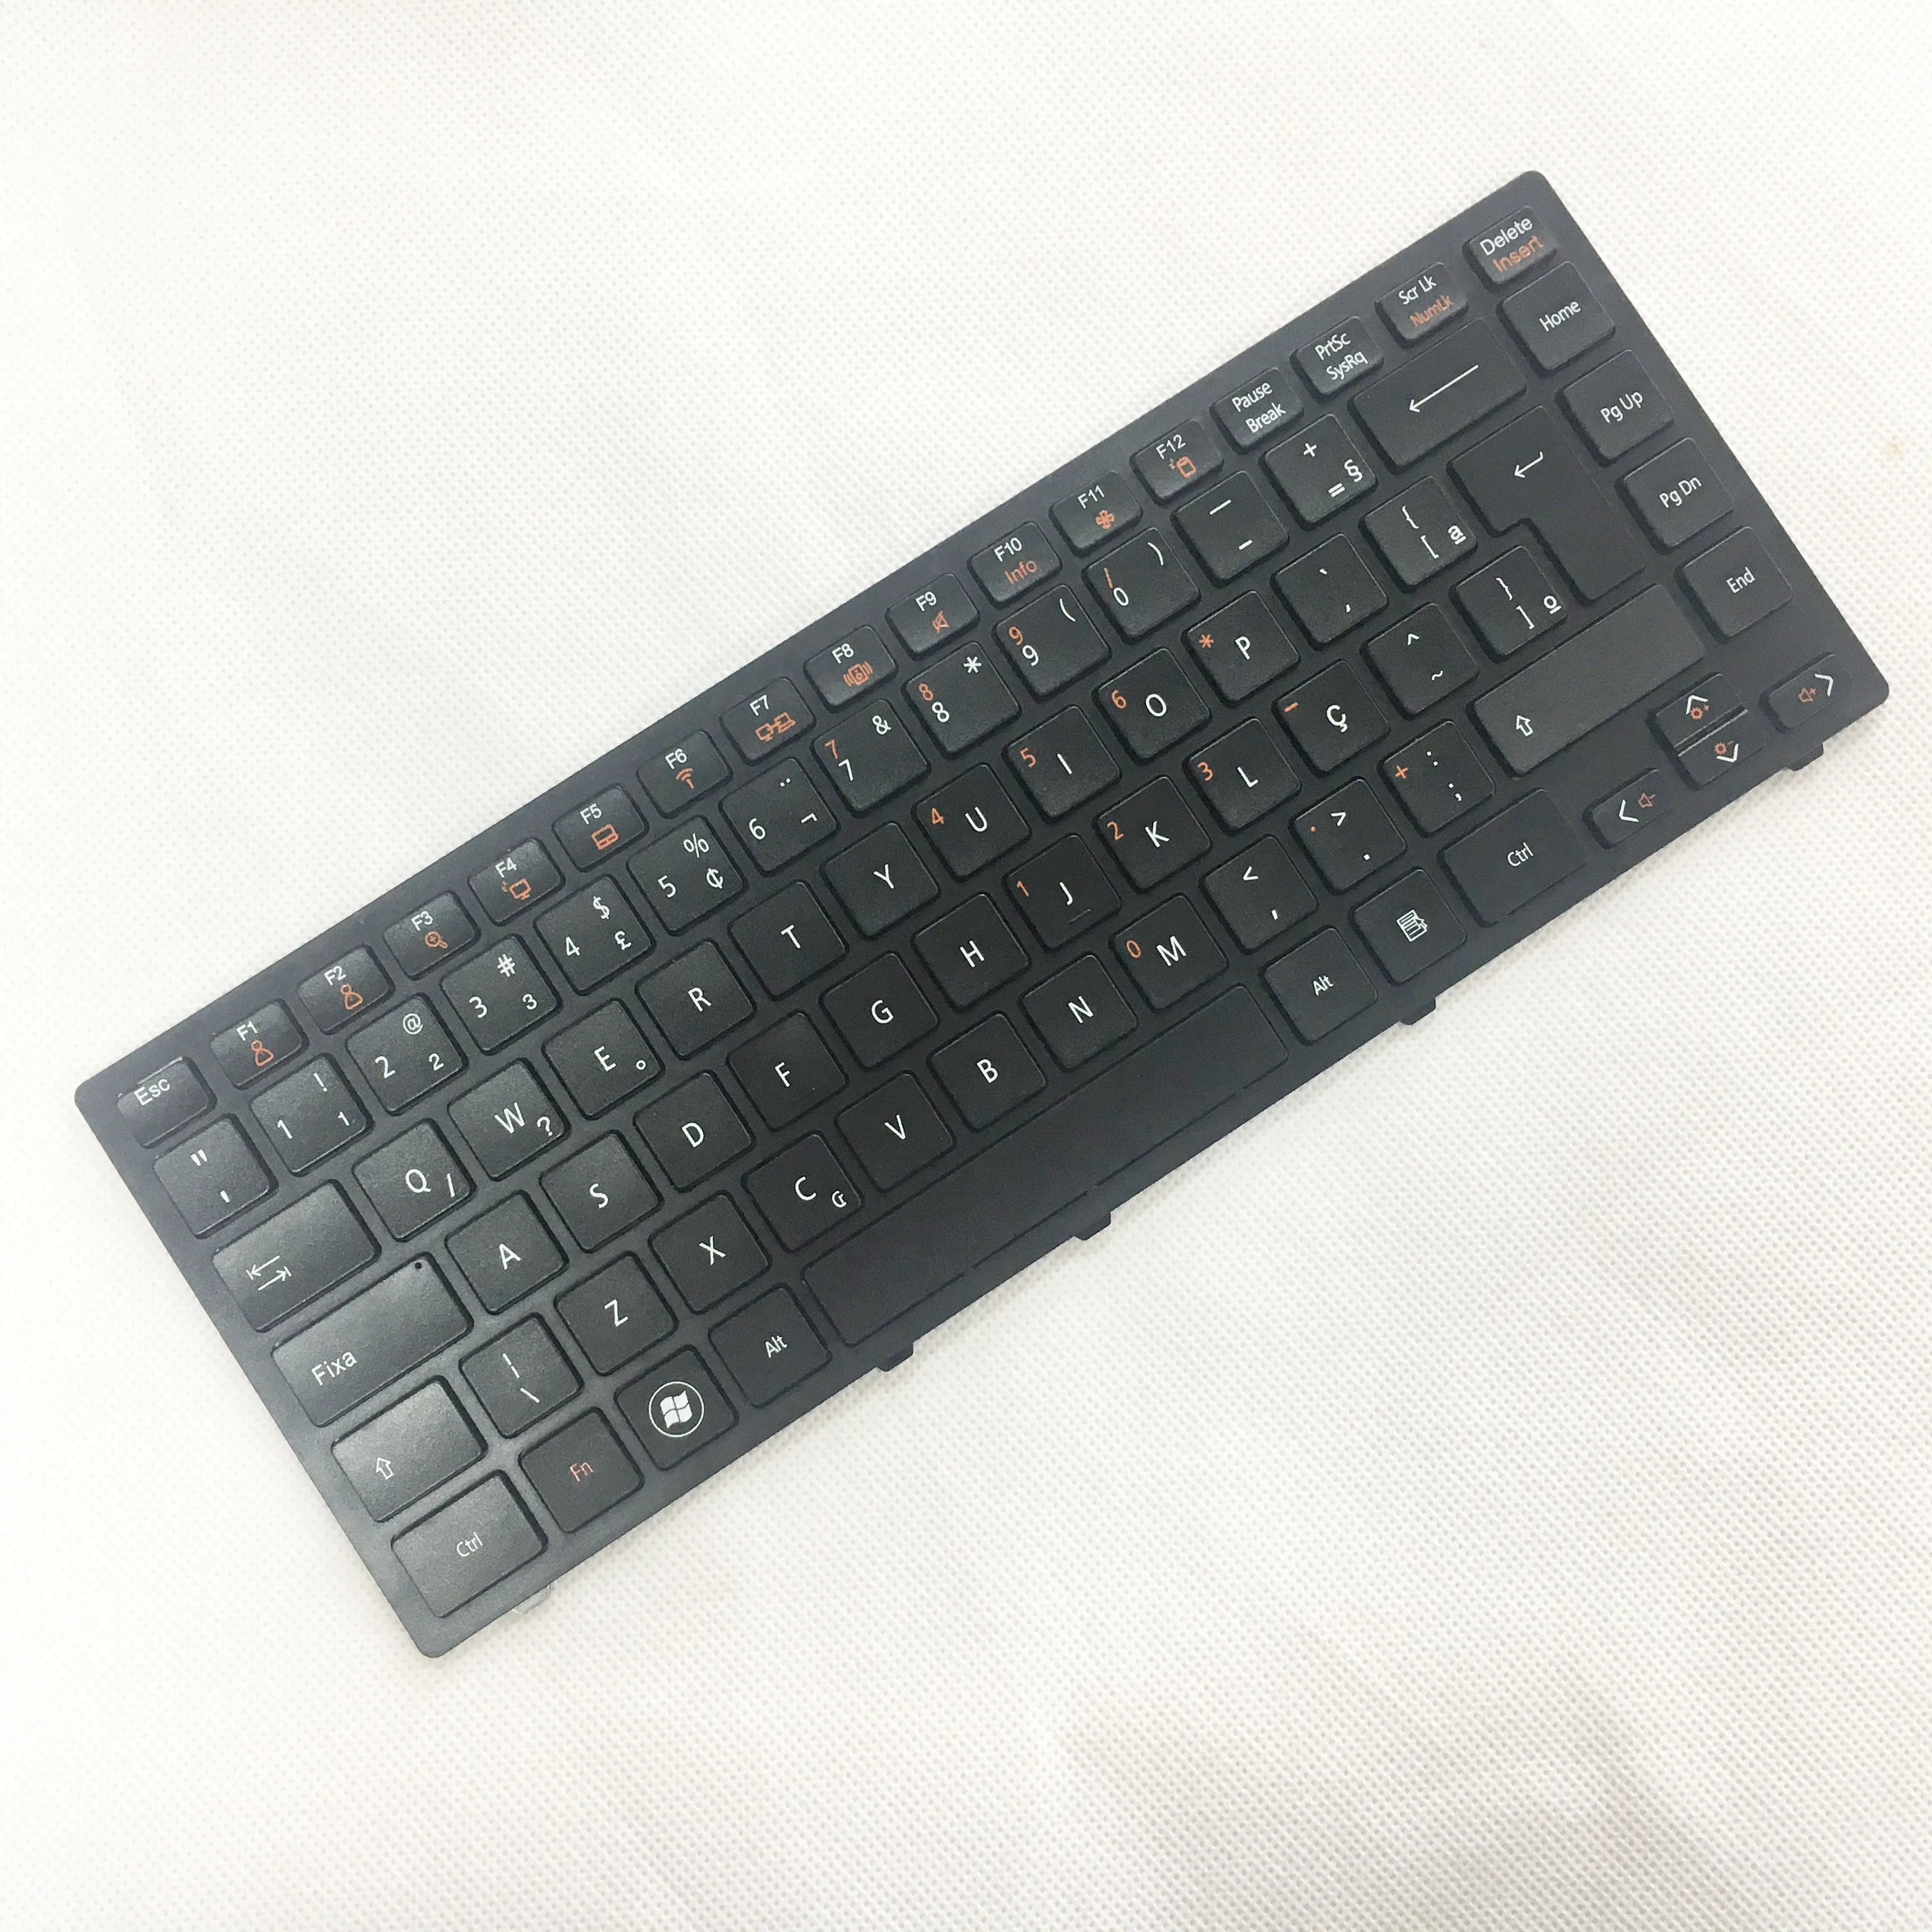 Brand New For Lg S425 S430 E420 S460 N460 N450 Laptop Keyboard Br ...